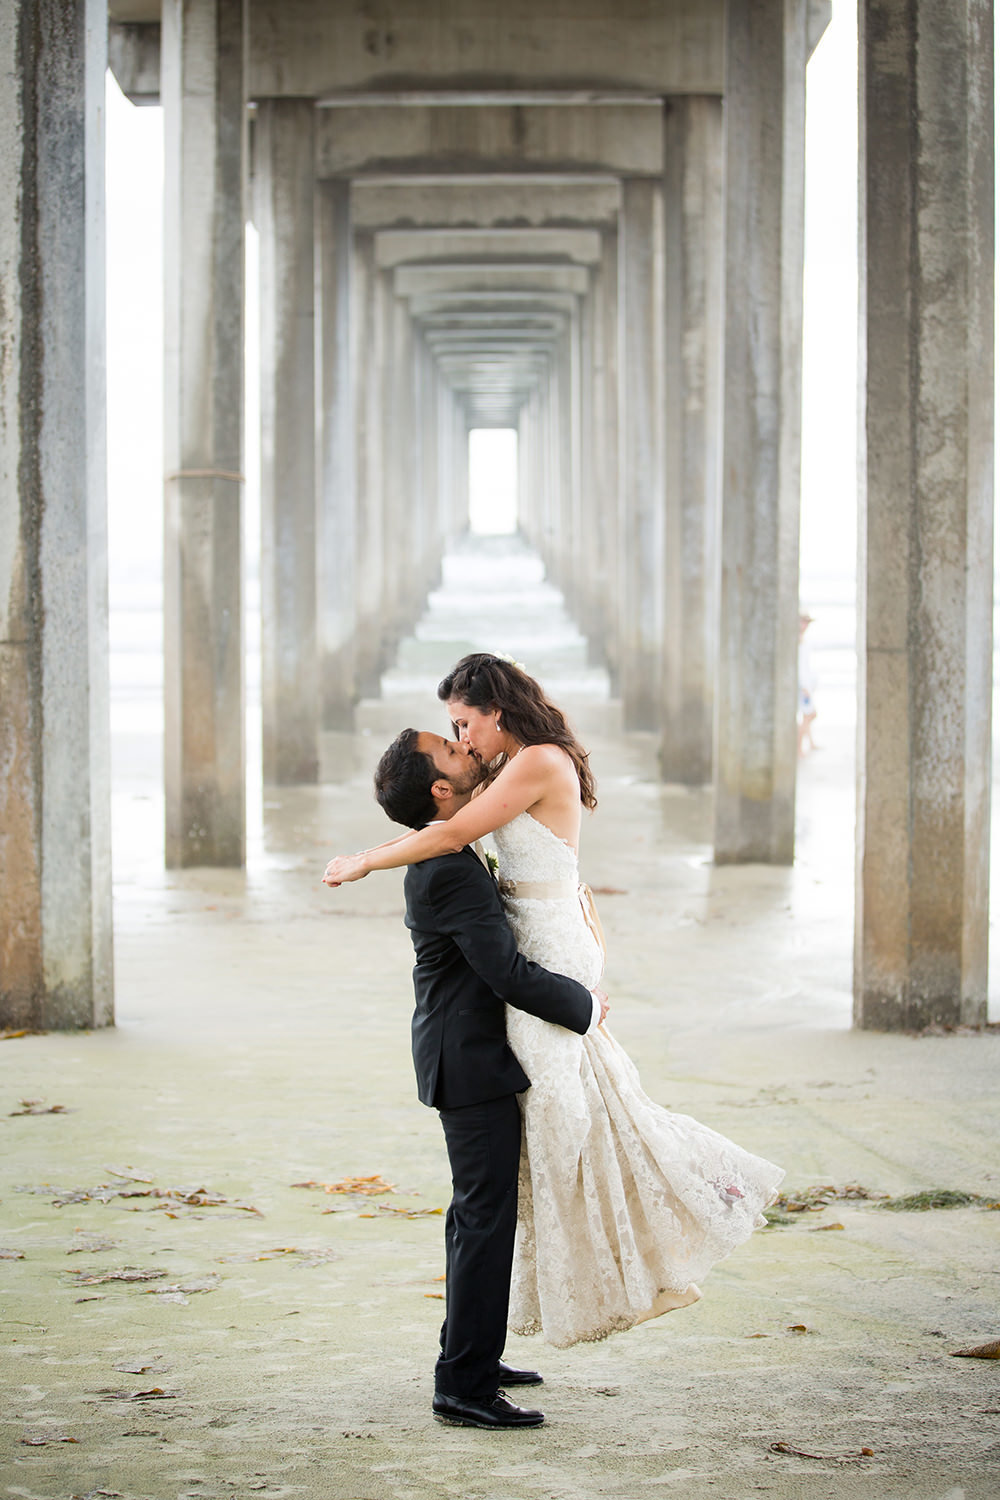 scripps pier with bride and groom